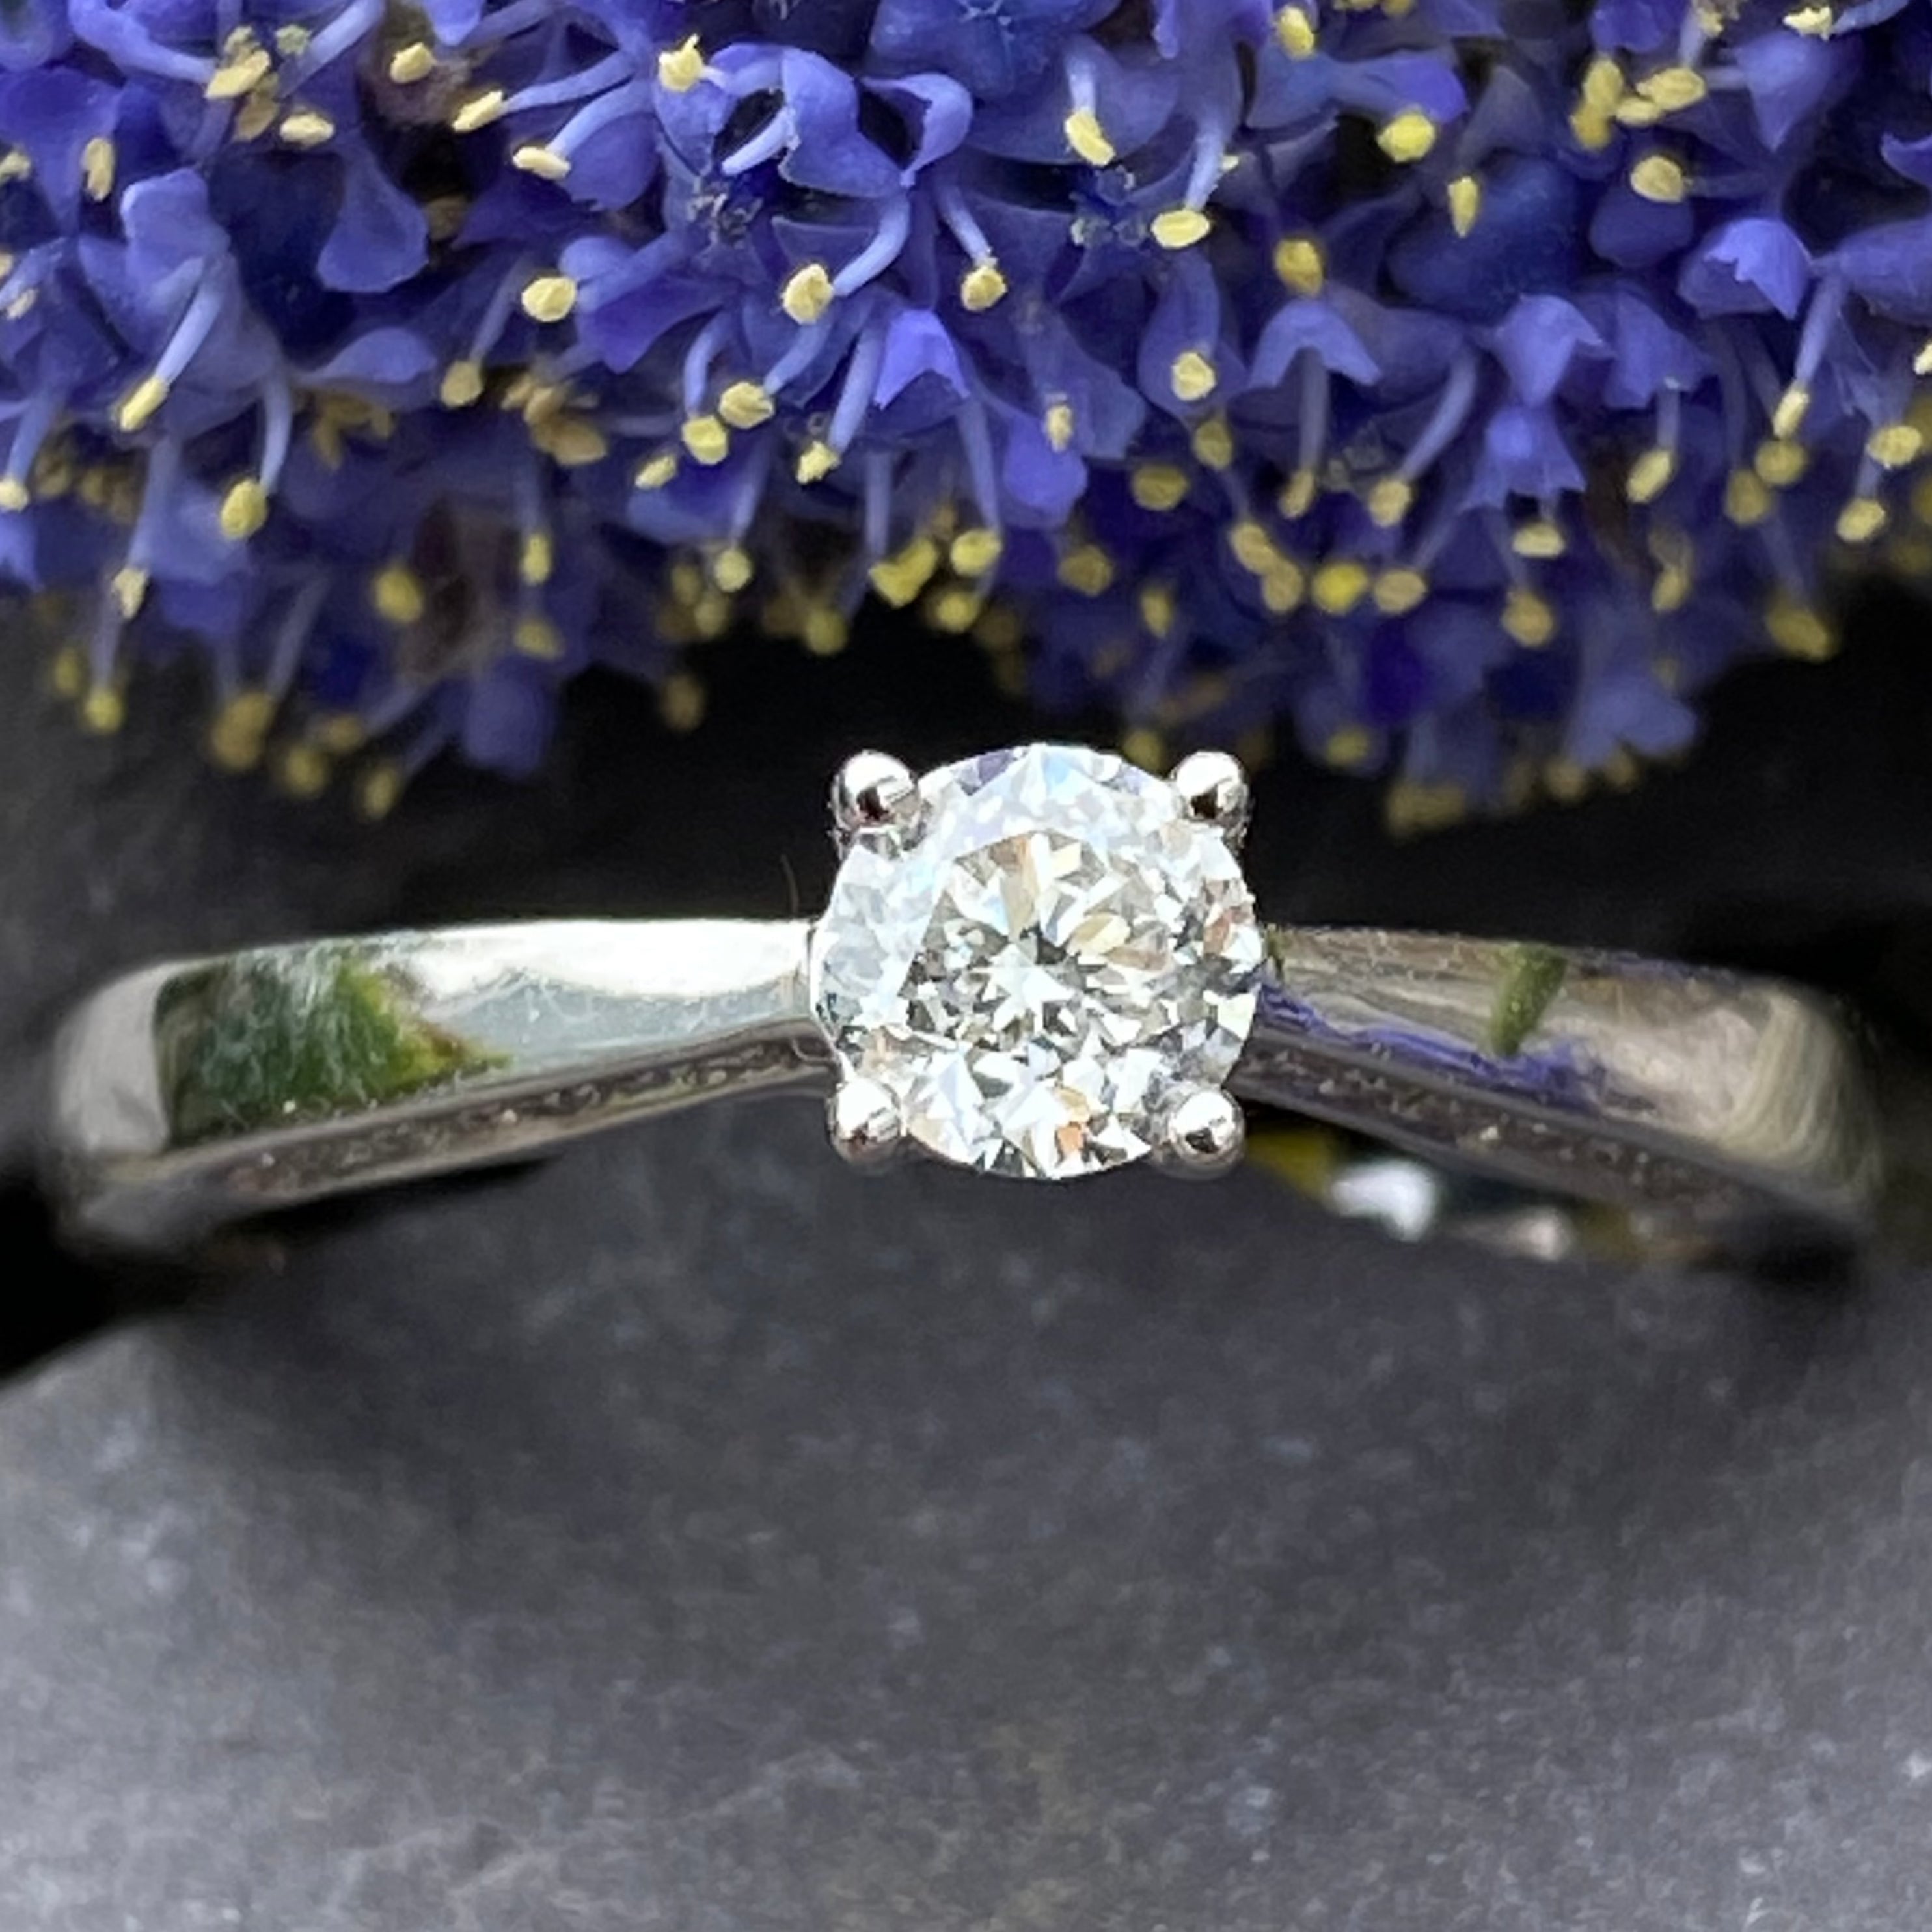 18ct White Gold Diamond Engagement Ring Size M or 6 1/4 US.